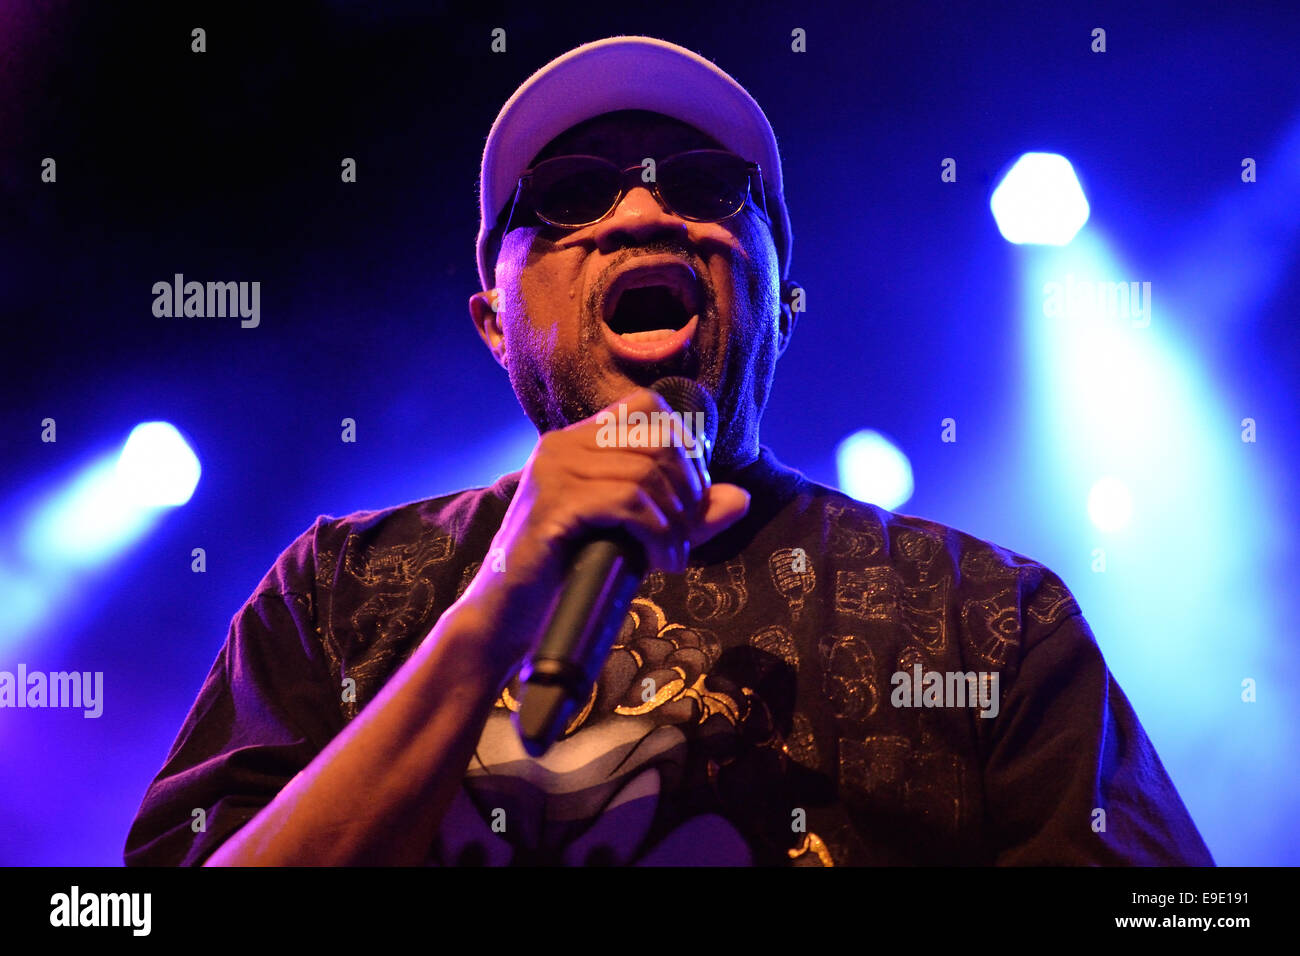 BARCELONA - MAY 15: Swamp Dogg, American soul music band, performance at Barts stage on May 15, 2014 in Barcelona, Spain. Stock Photo